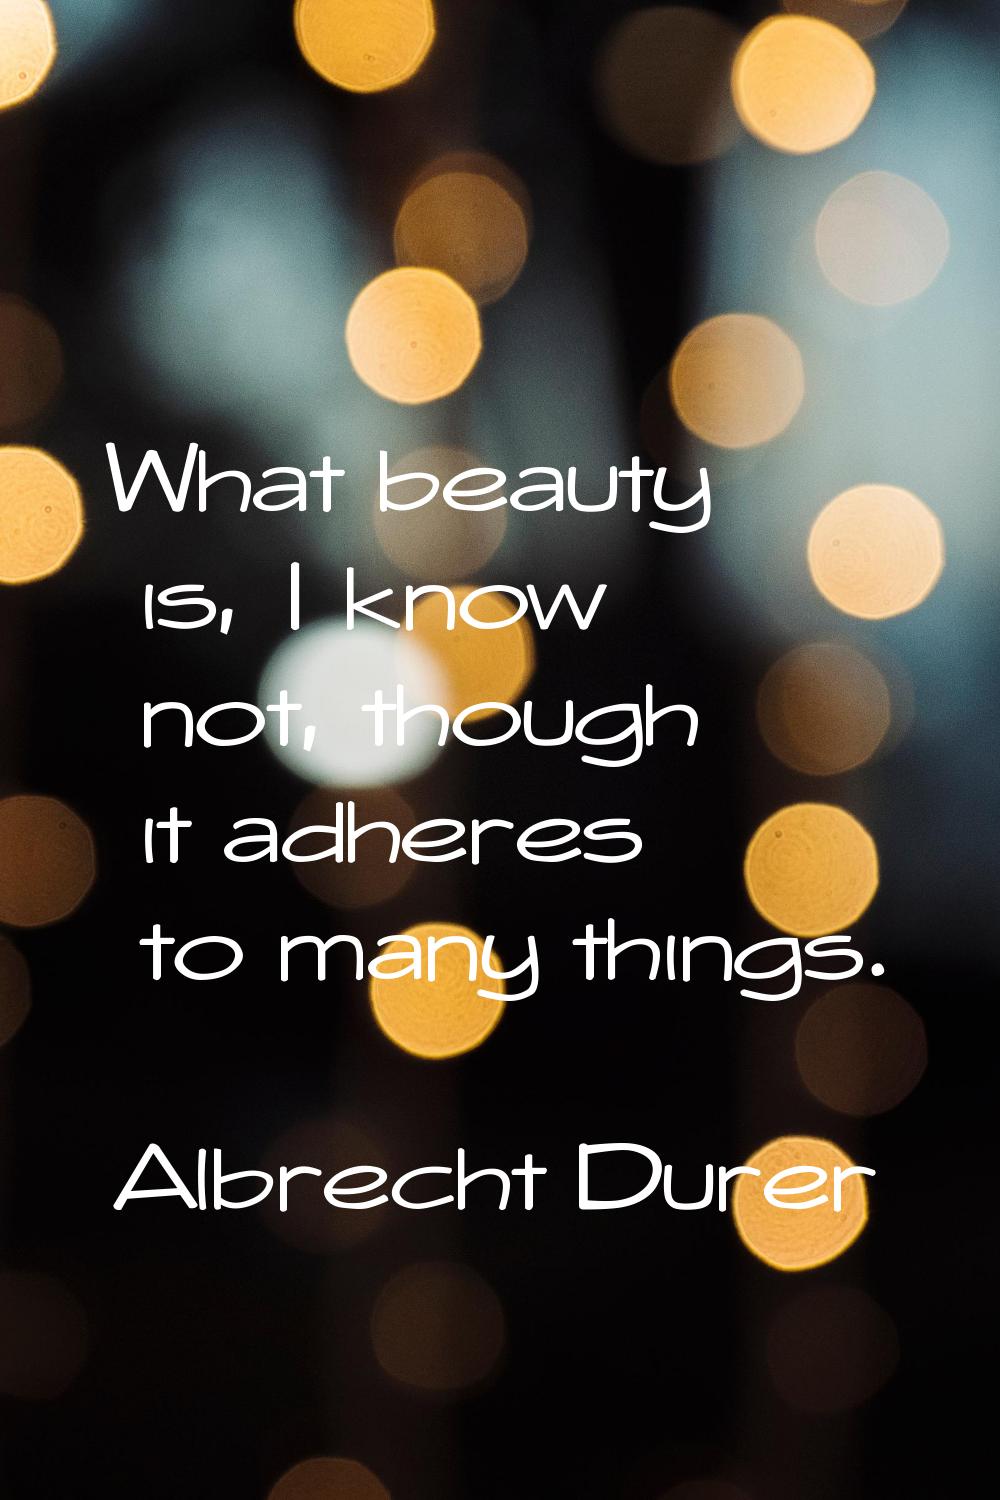 What beauty is, I know not, though it adheres to many things.